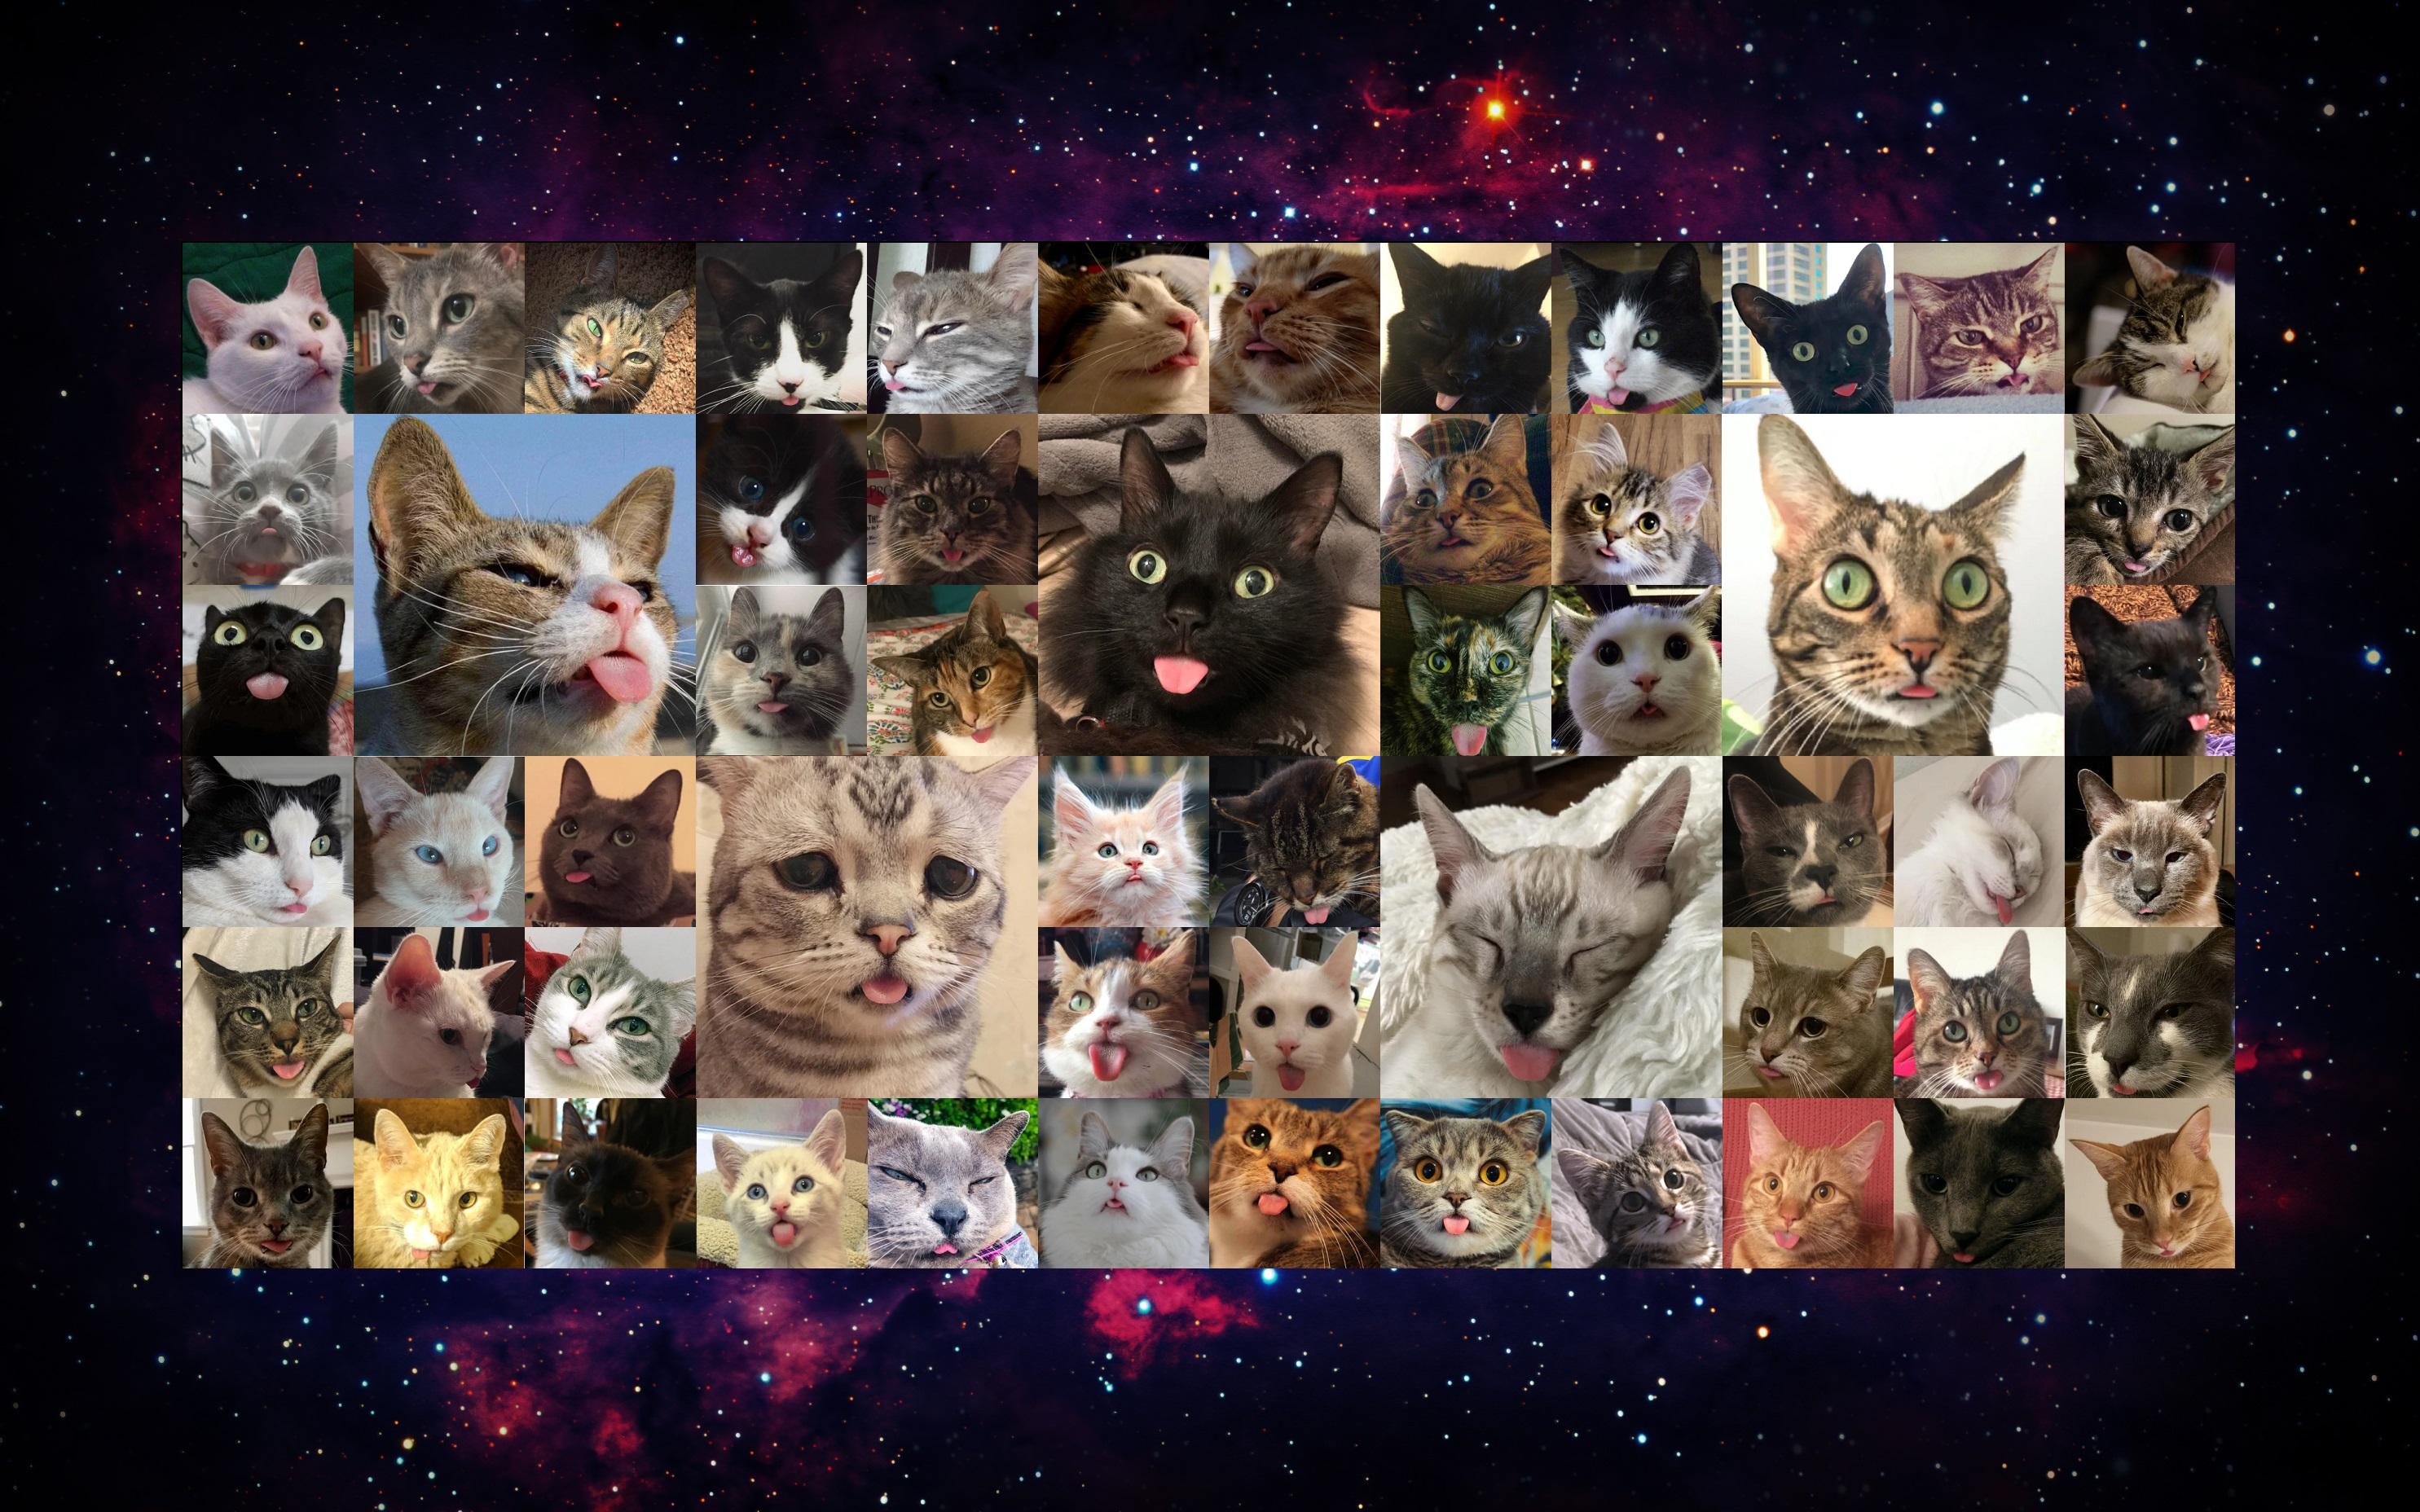 A Blep Pilation Wallpaper I Made For Coworker In Good Old